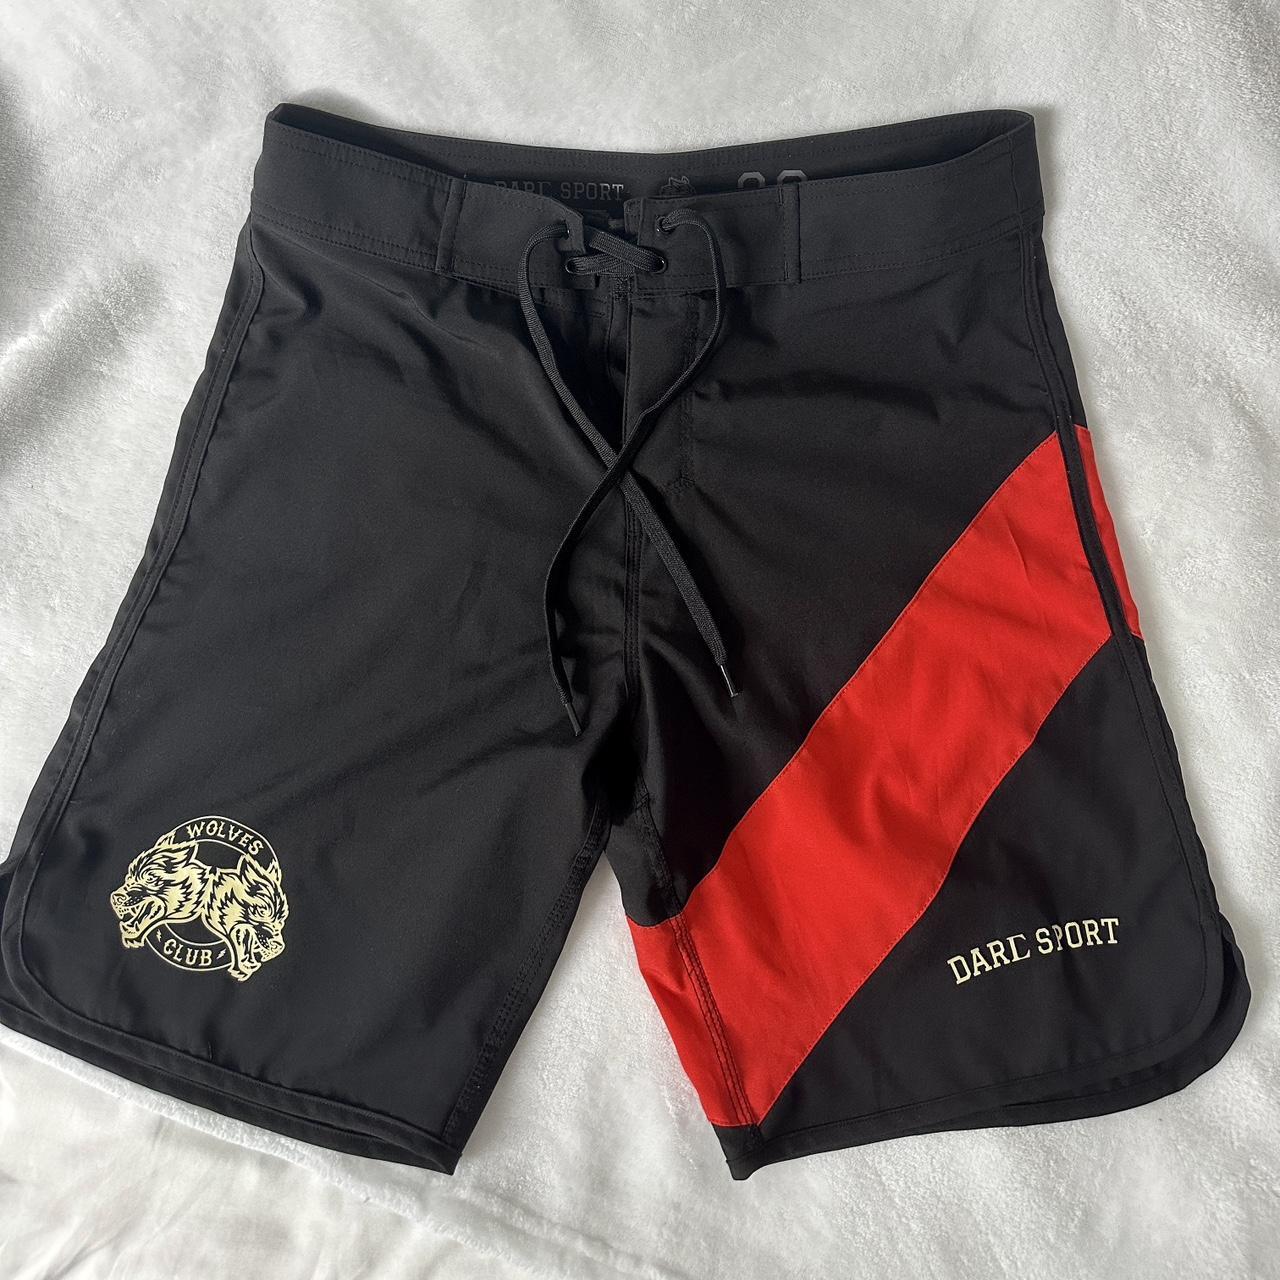 DARC SPORT STAGE SHORTS , Size 30, Never Worn , I cut